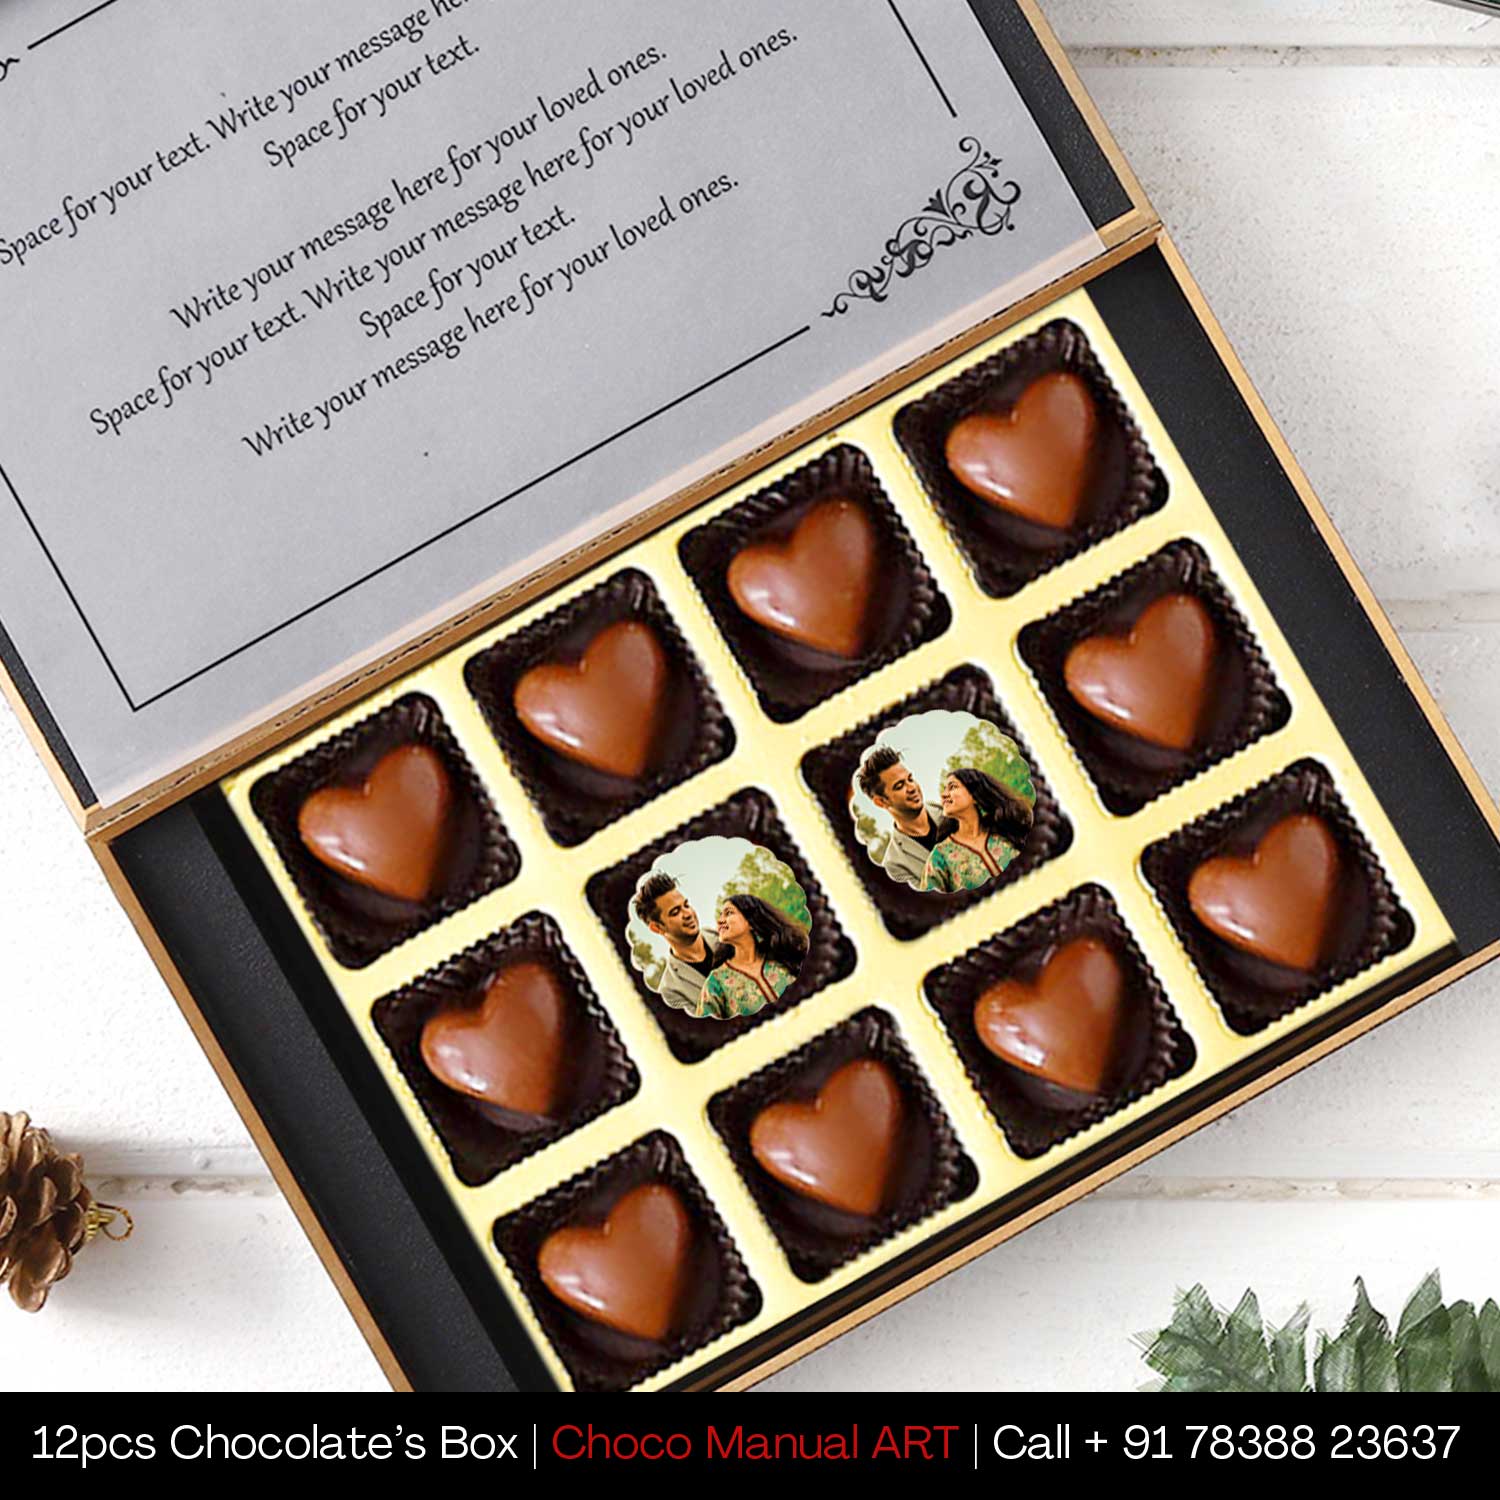 Send Promise Day Premium Personalised chocolate gift